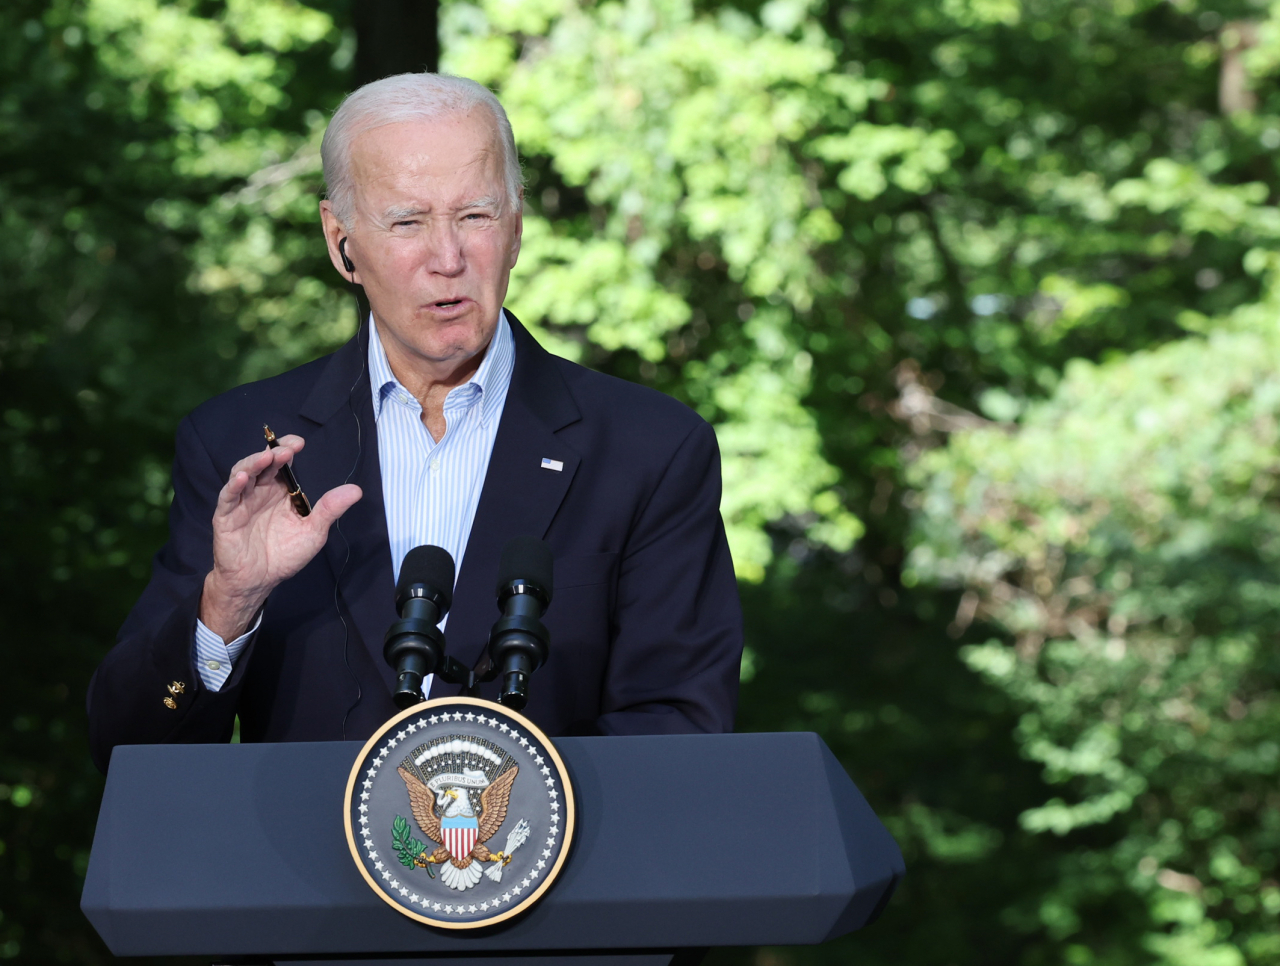 US President Joe Biden speaks during a joint press conference with his South Korean and Japanese counterparts, Yoon Suk Yeol and Fumio Kishida, at Camp David in Maryland on Friday (local time). (Yonhap)